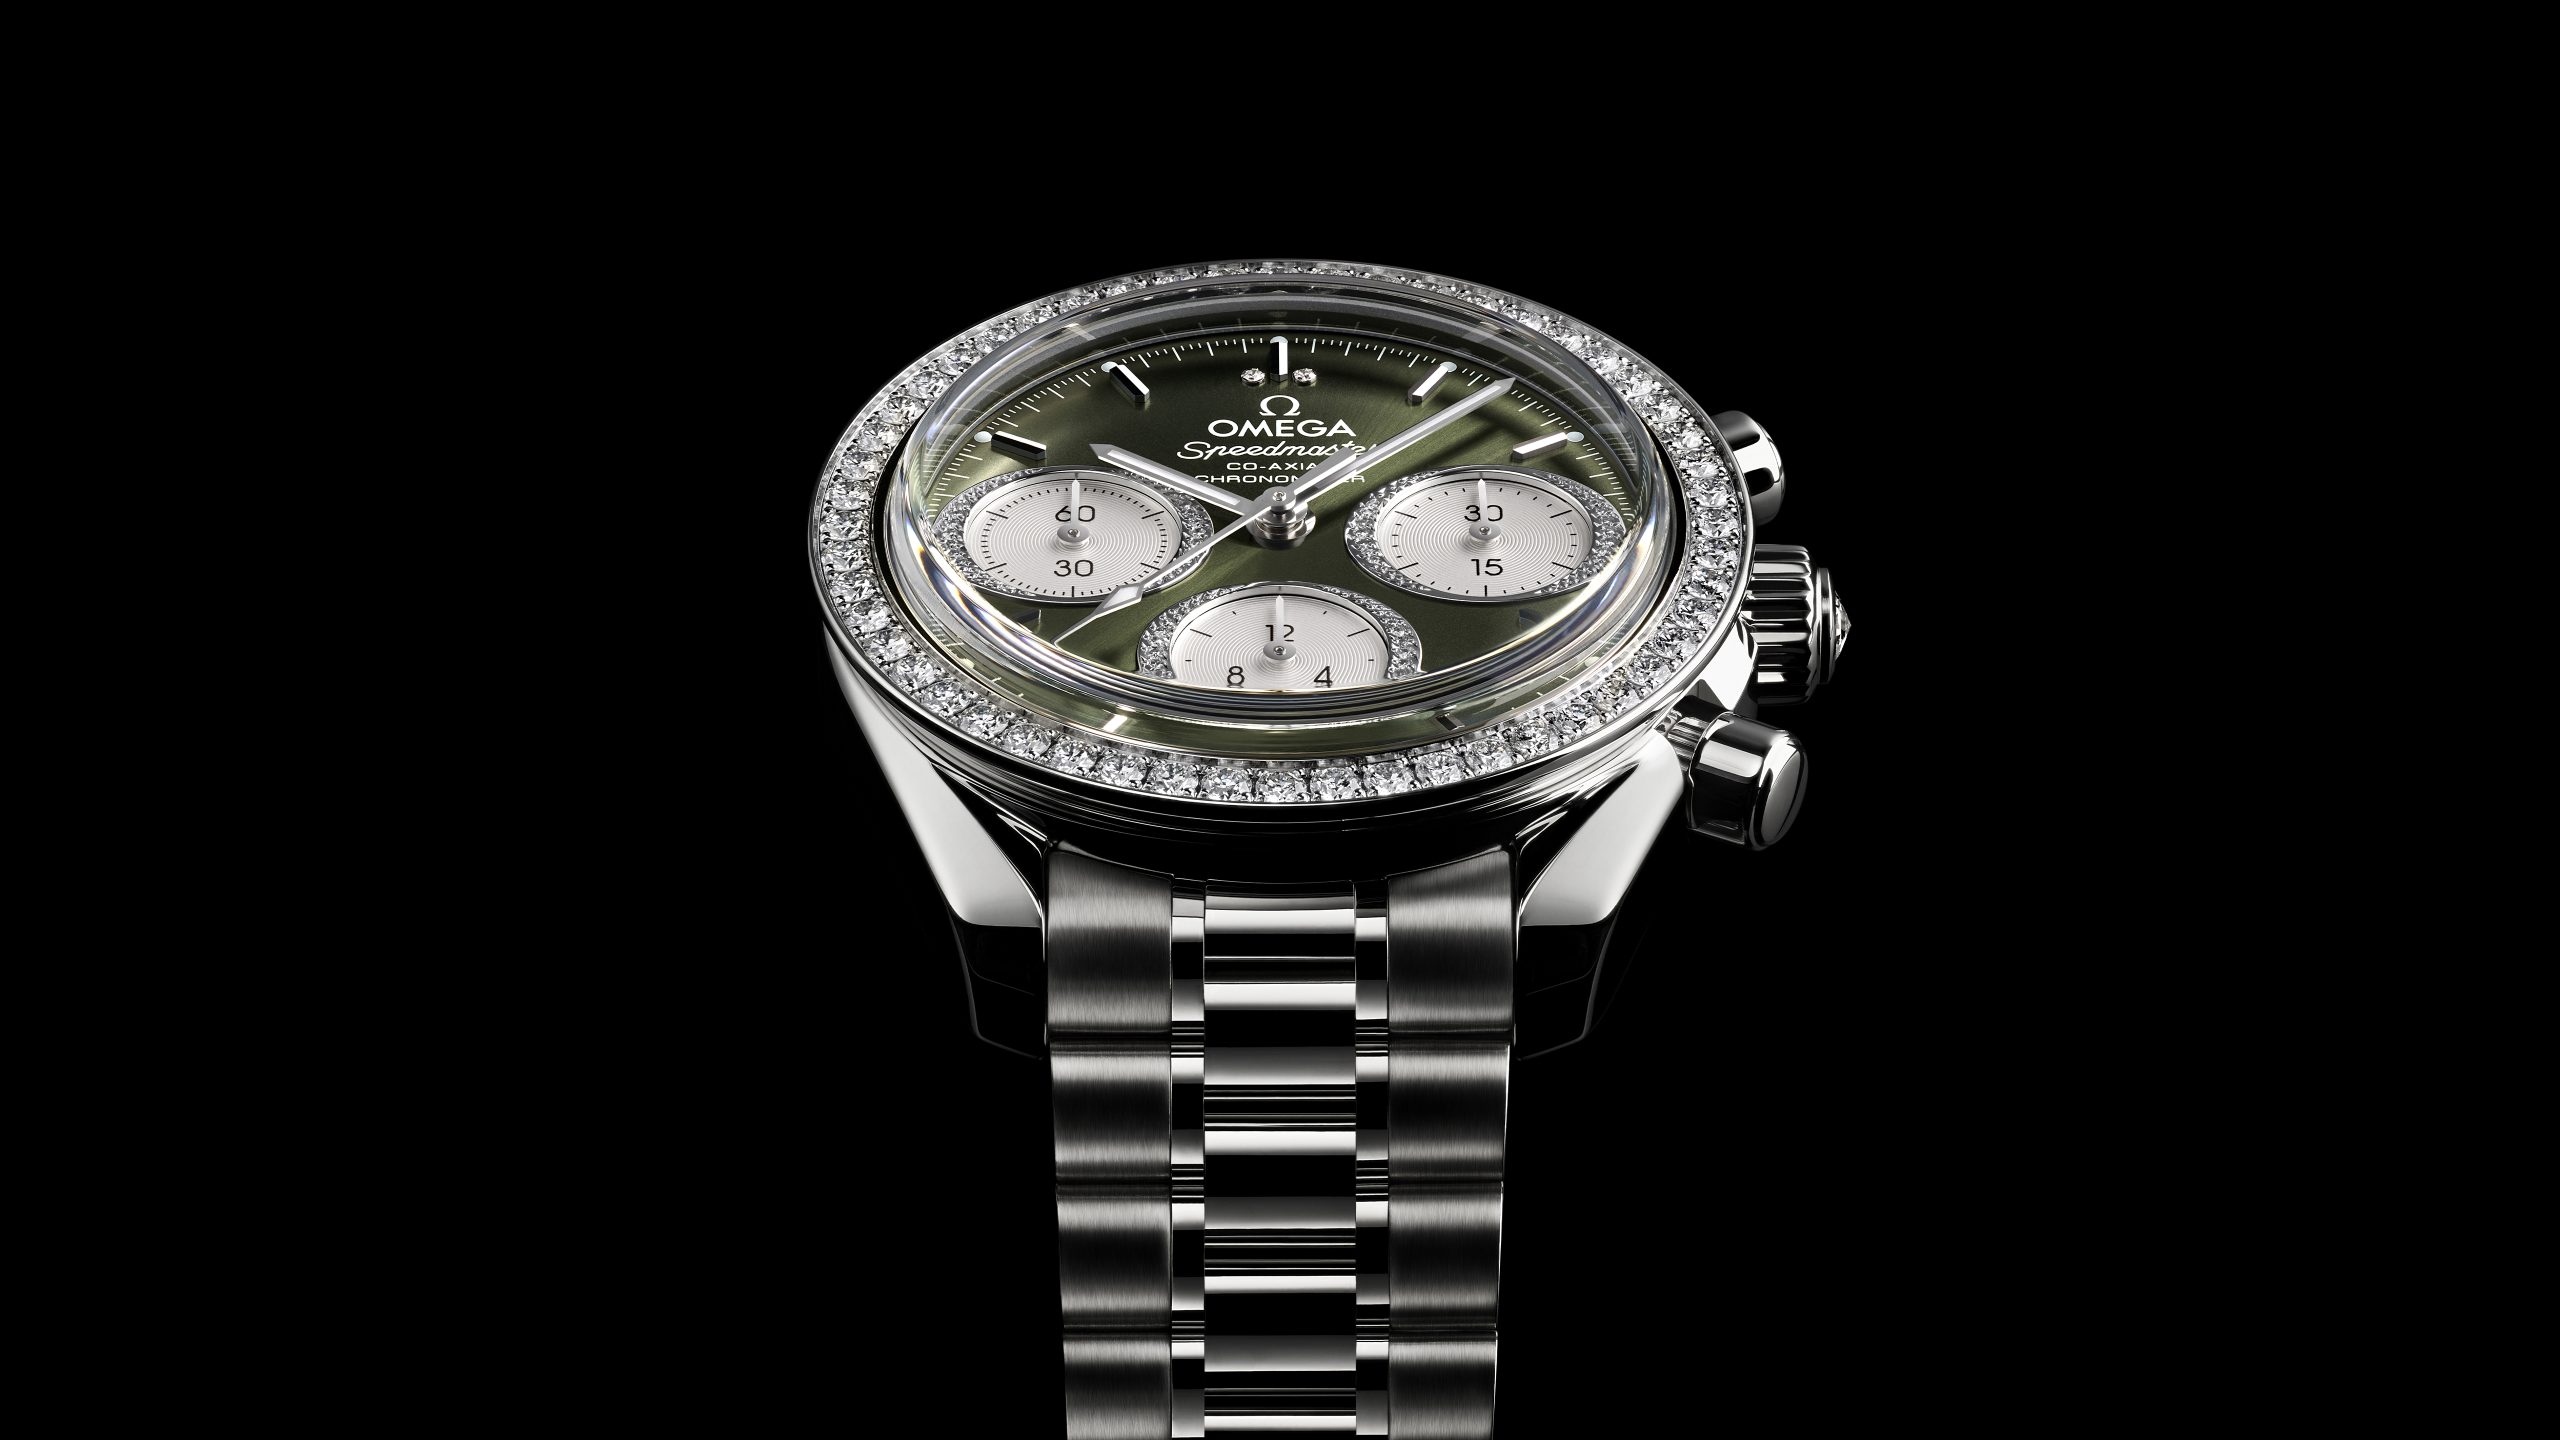 Interview: Omega’s President and CEO, Raynald Aeschlimann, on the New Speedmaster  38mm